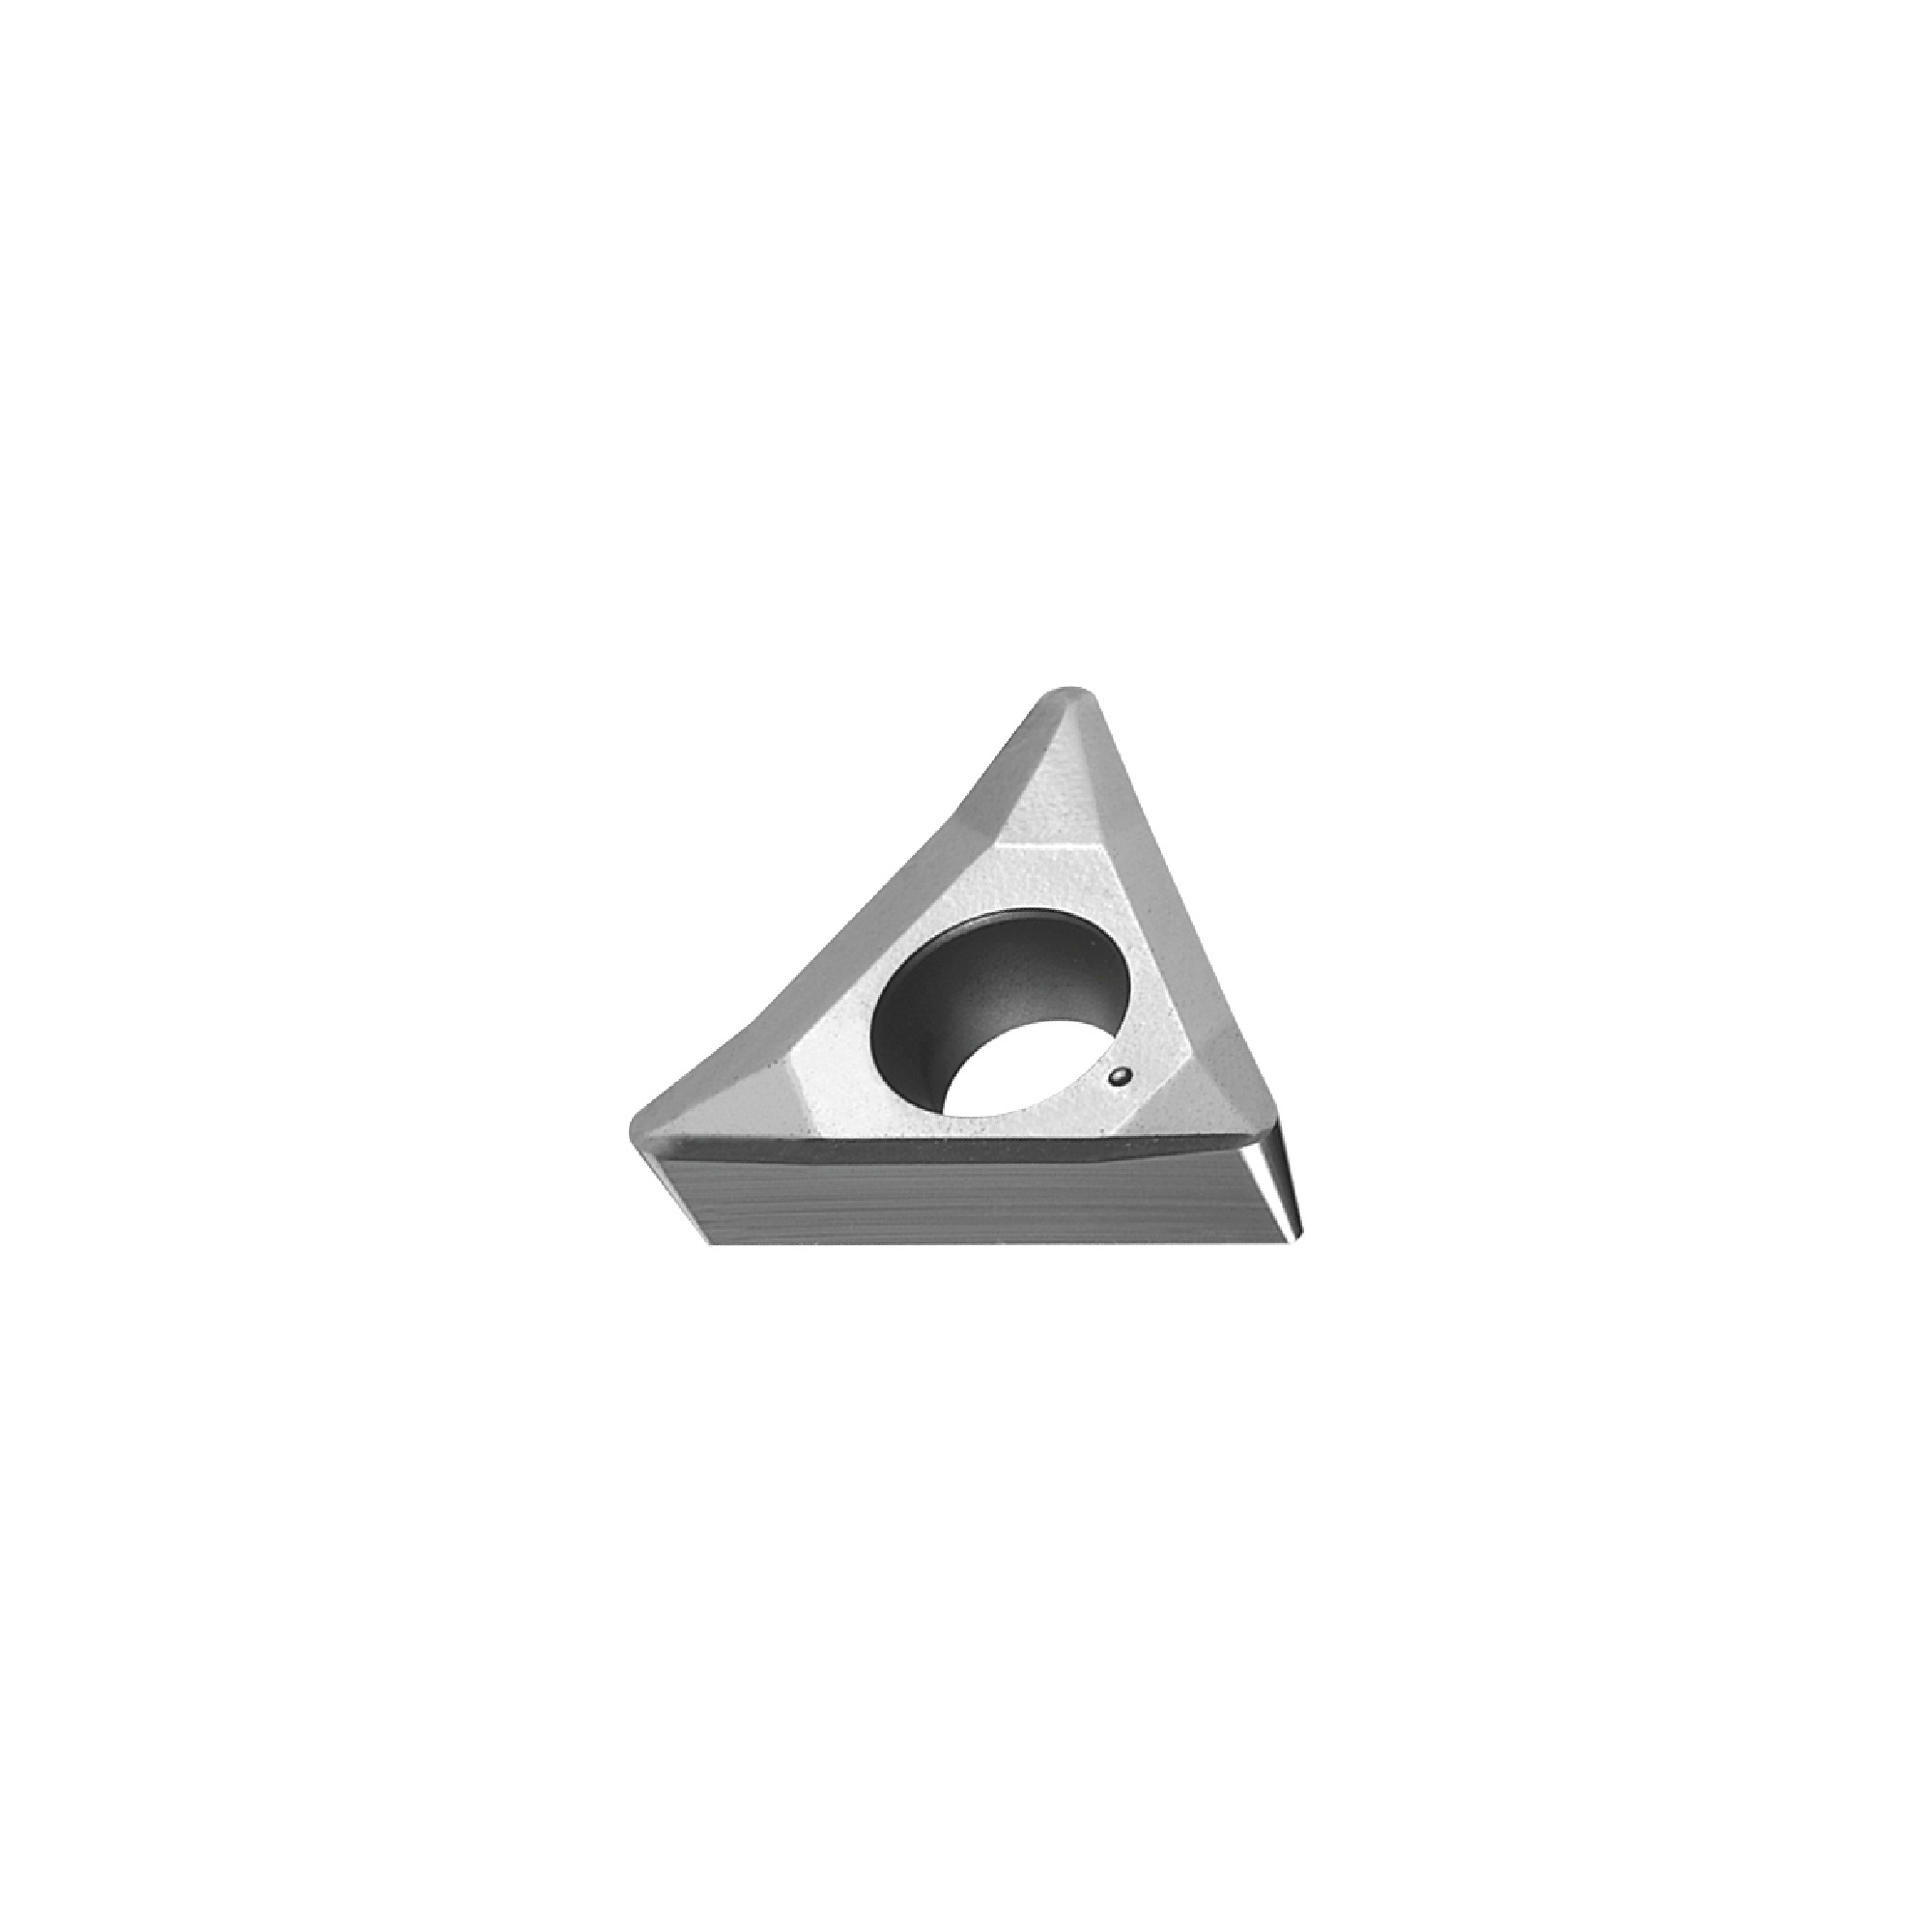 ARNO - TCMT3(2.5)2A-PM1 AM5120 - 60&#176; Triangle / Indexable Carbide Turning Insert